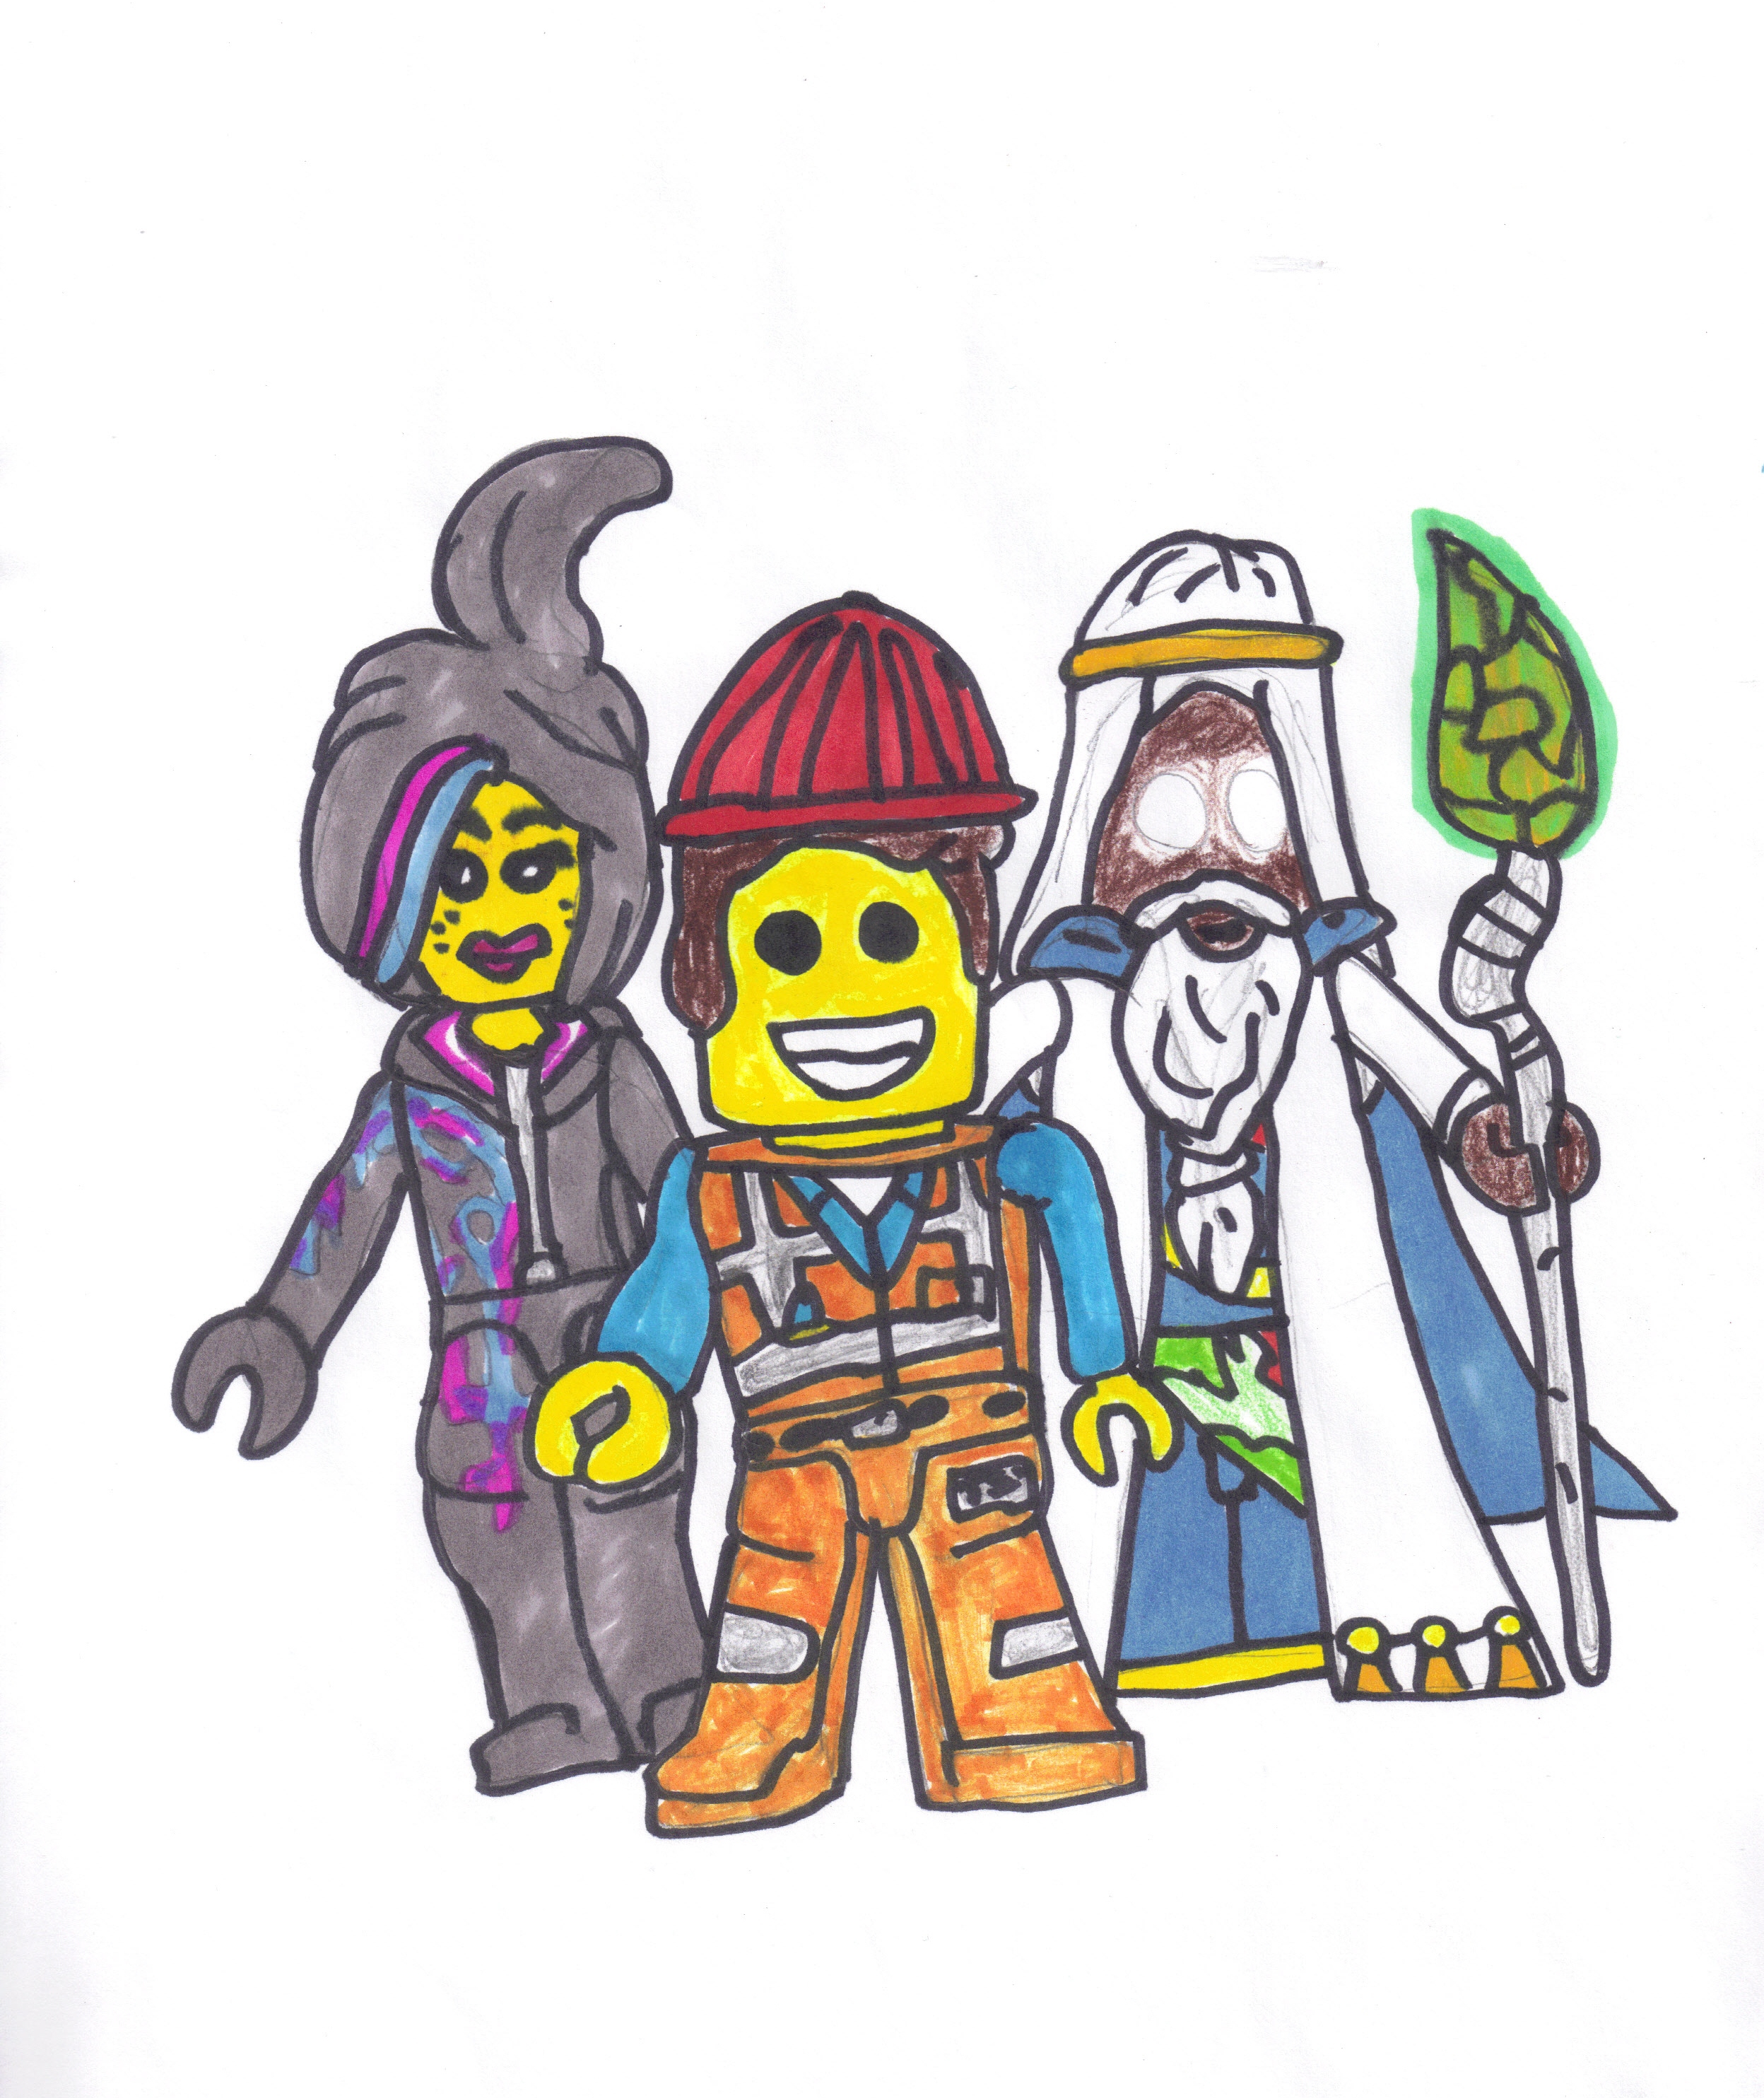 The Lego Movie Art by SonicClone